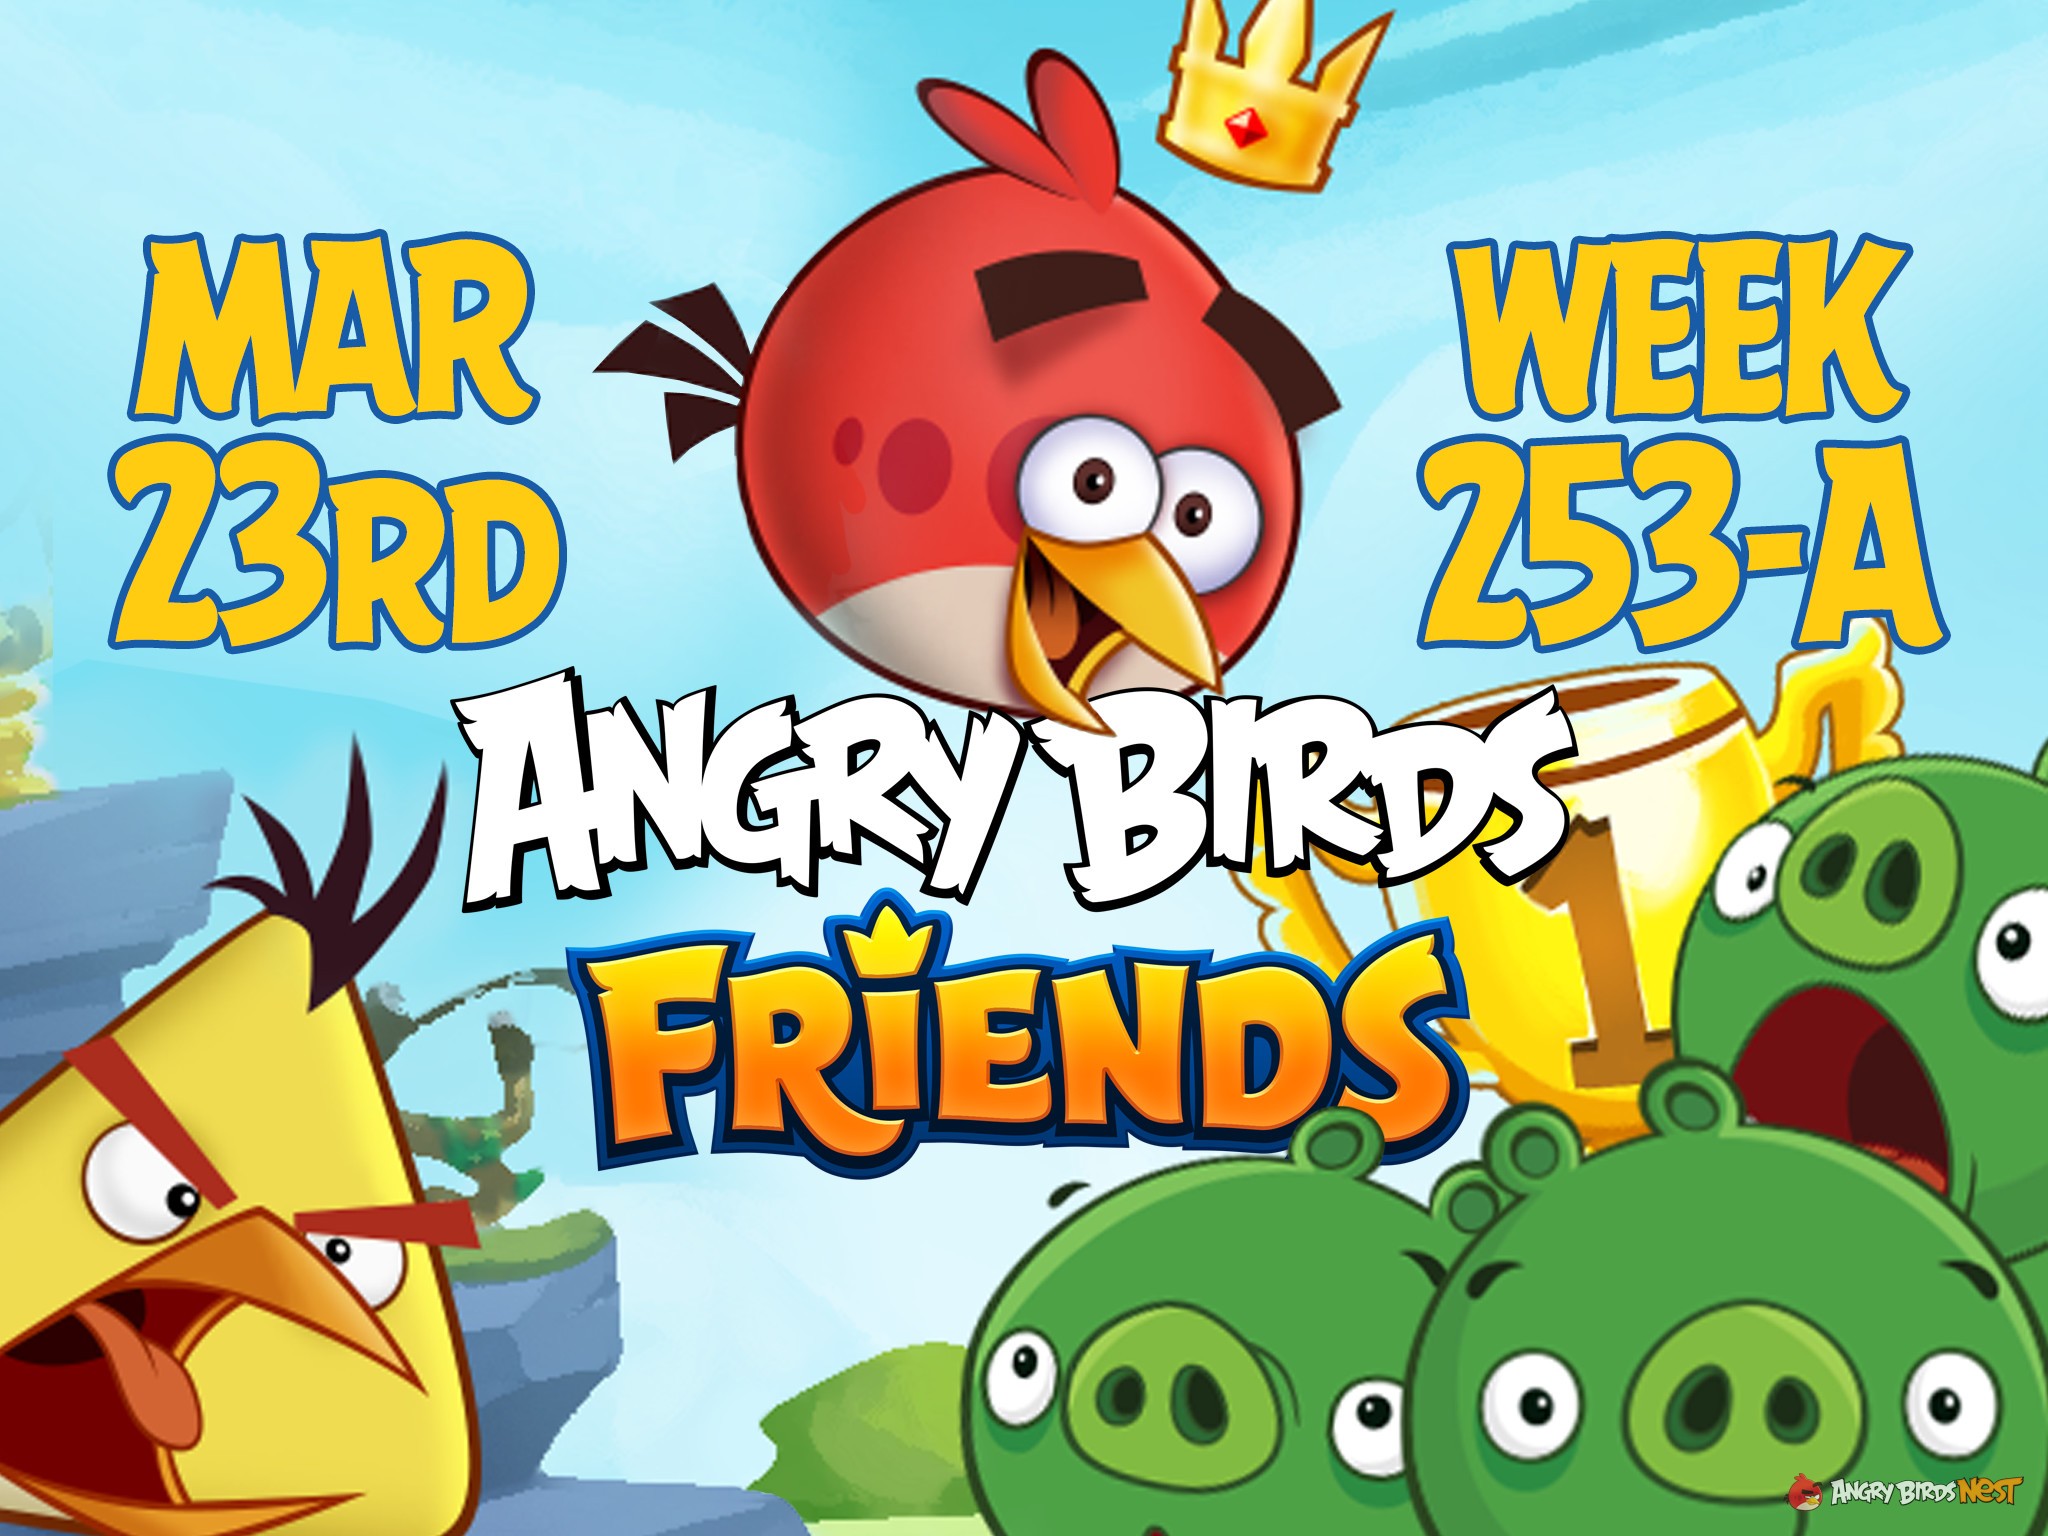 Angry Birds Friends Tournament Week 253-A Feature Image